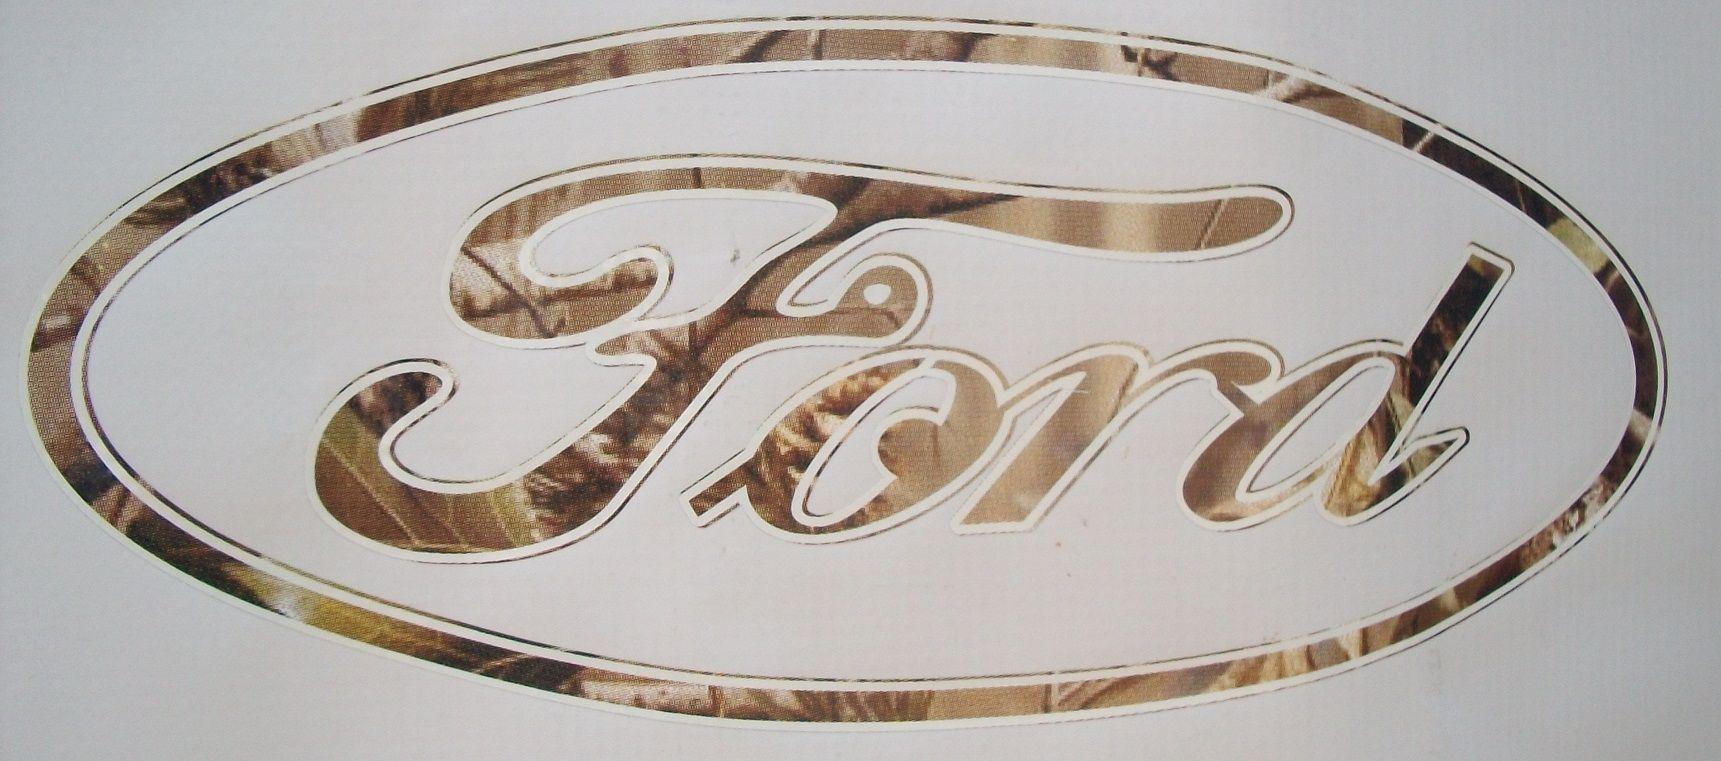 Camo Ford Logo - Ford Oval Camo Decal :: Accessories :: Scheid Diesel